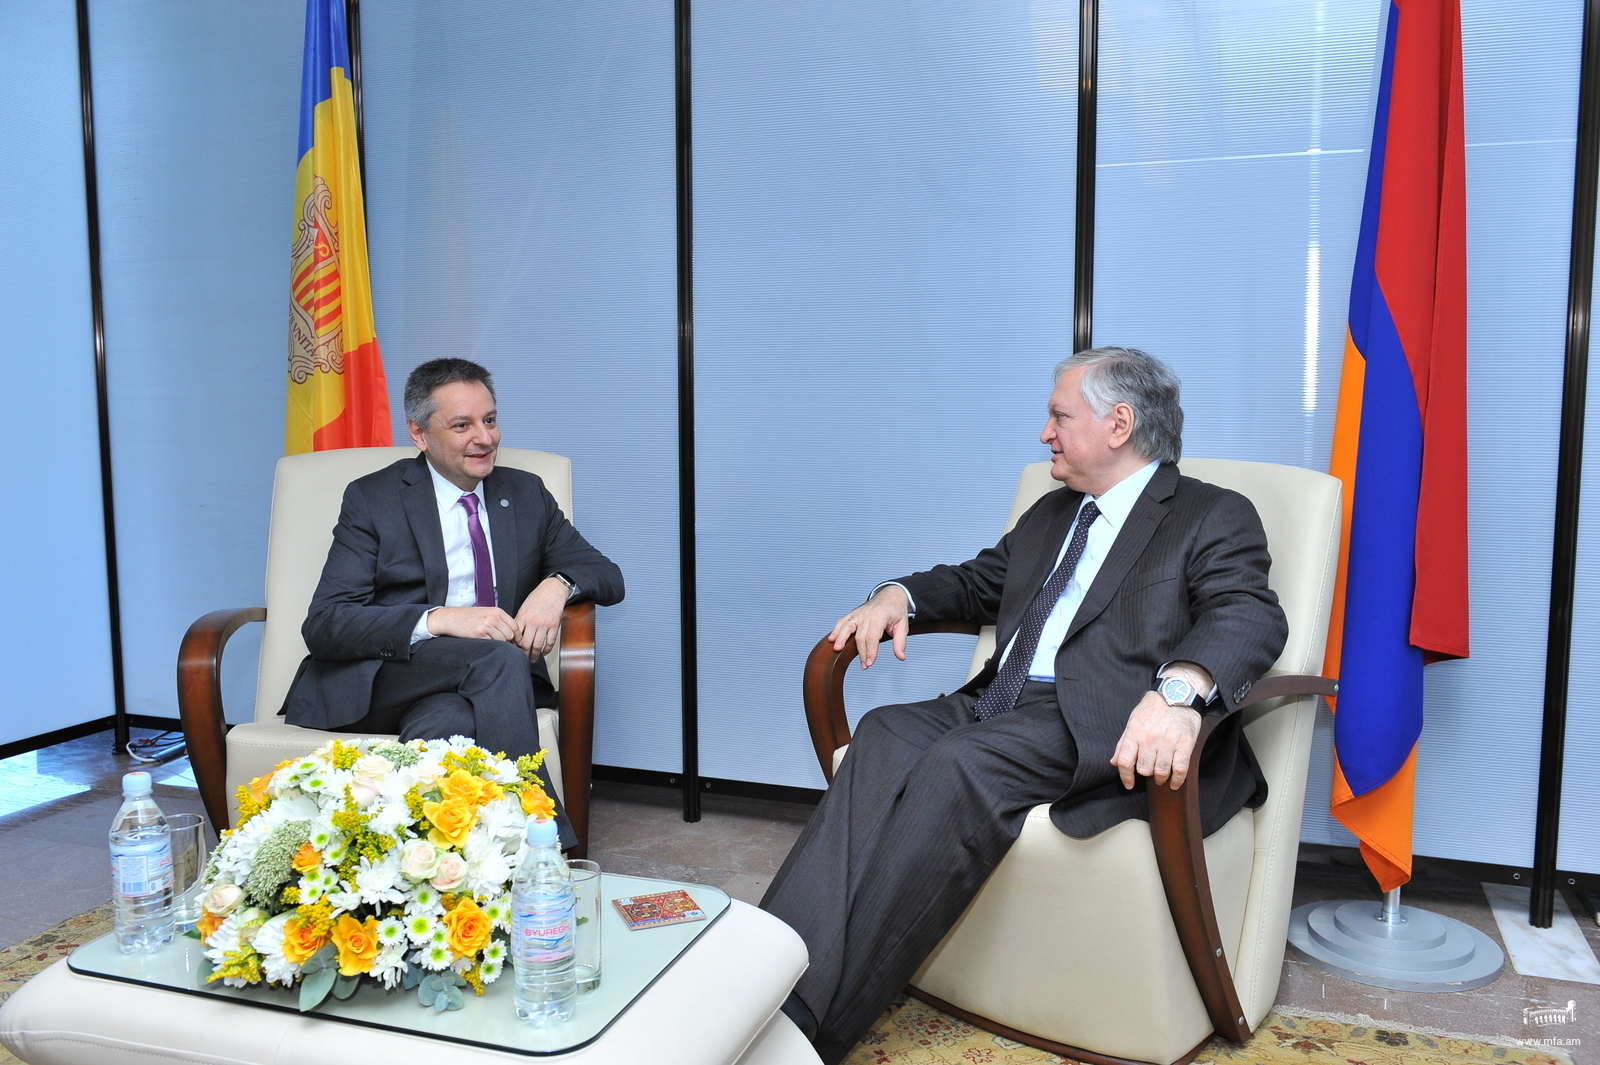 Meeting of Foreign Ministers of Armenia and Andorra